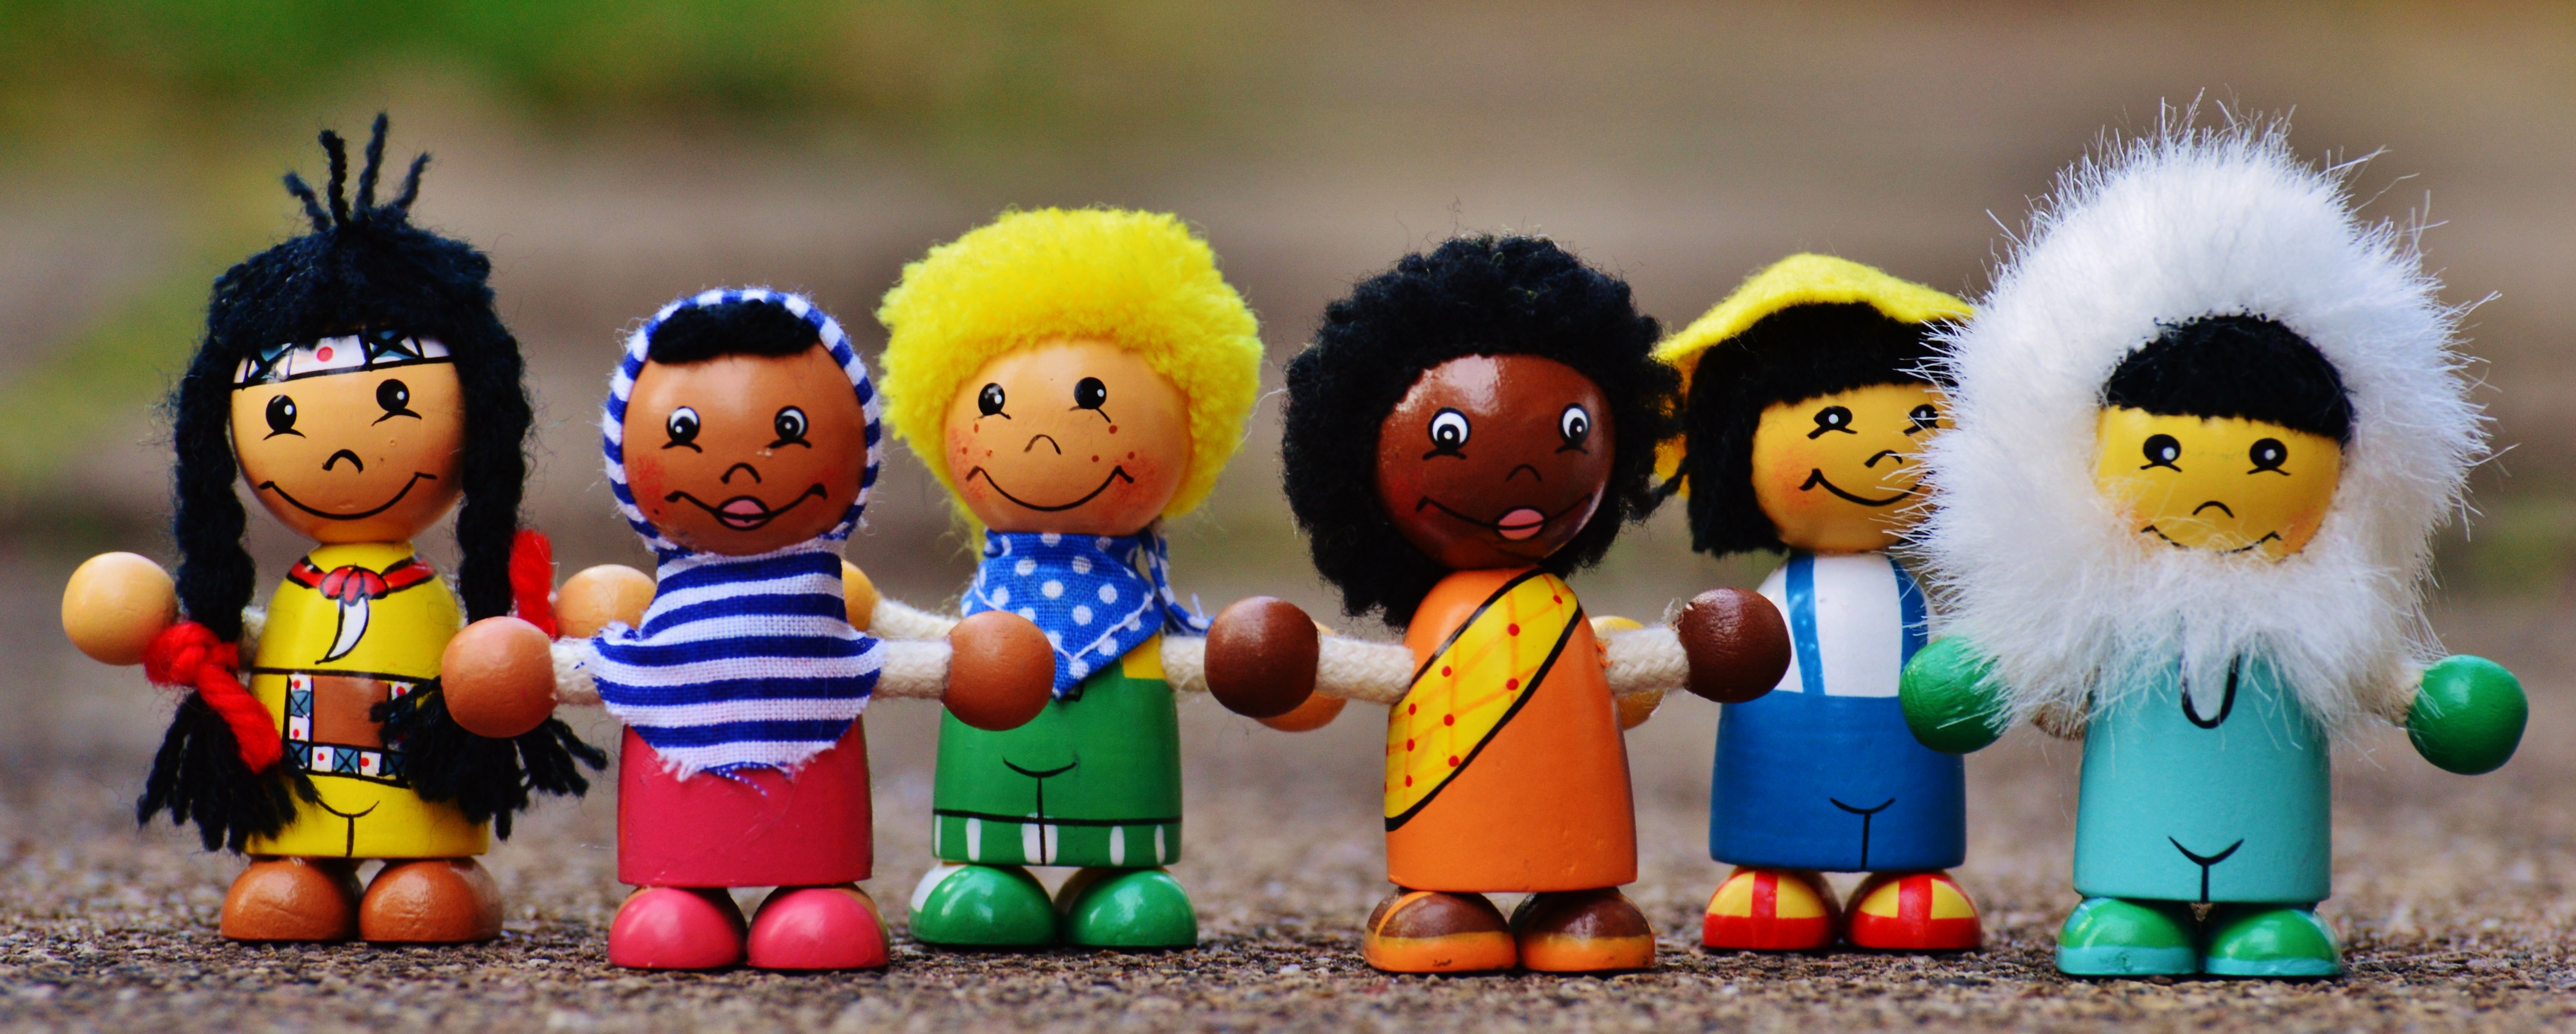 Free photo Wooden toys in the form of human beings